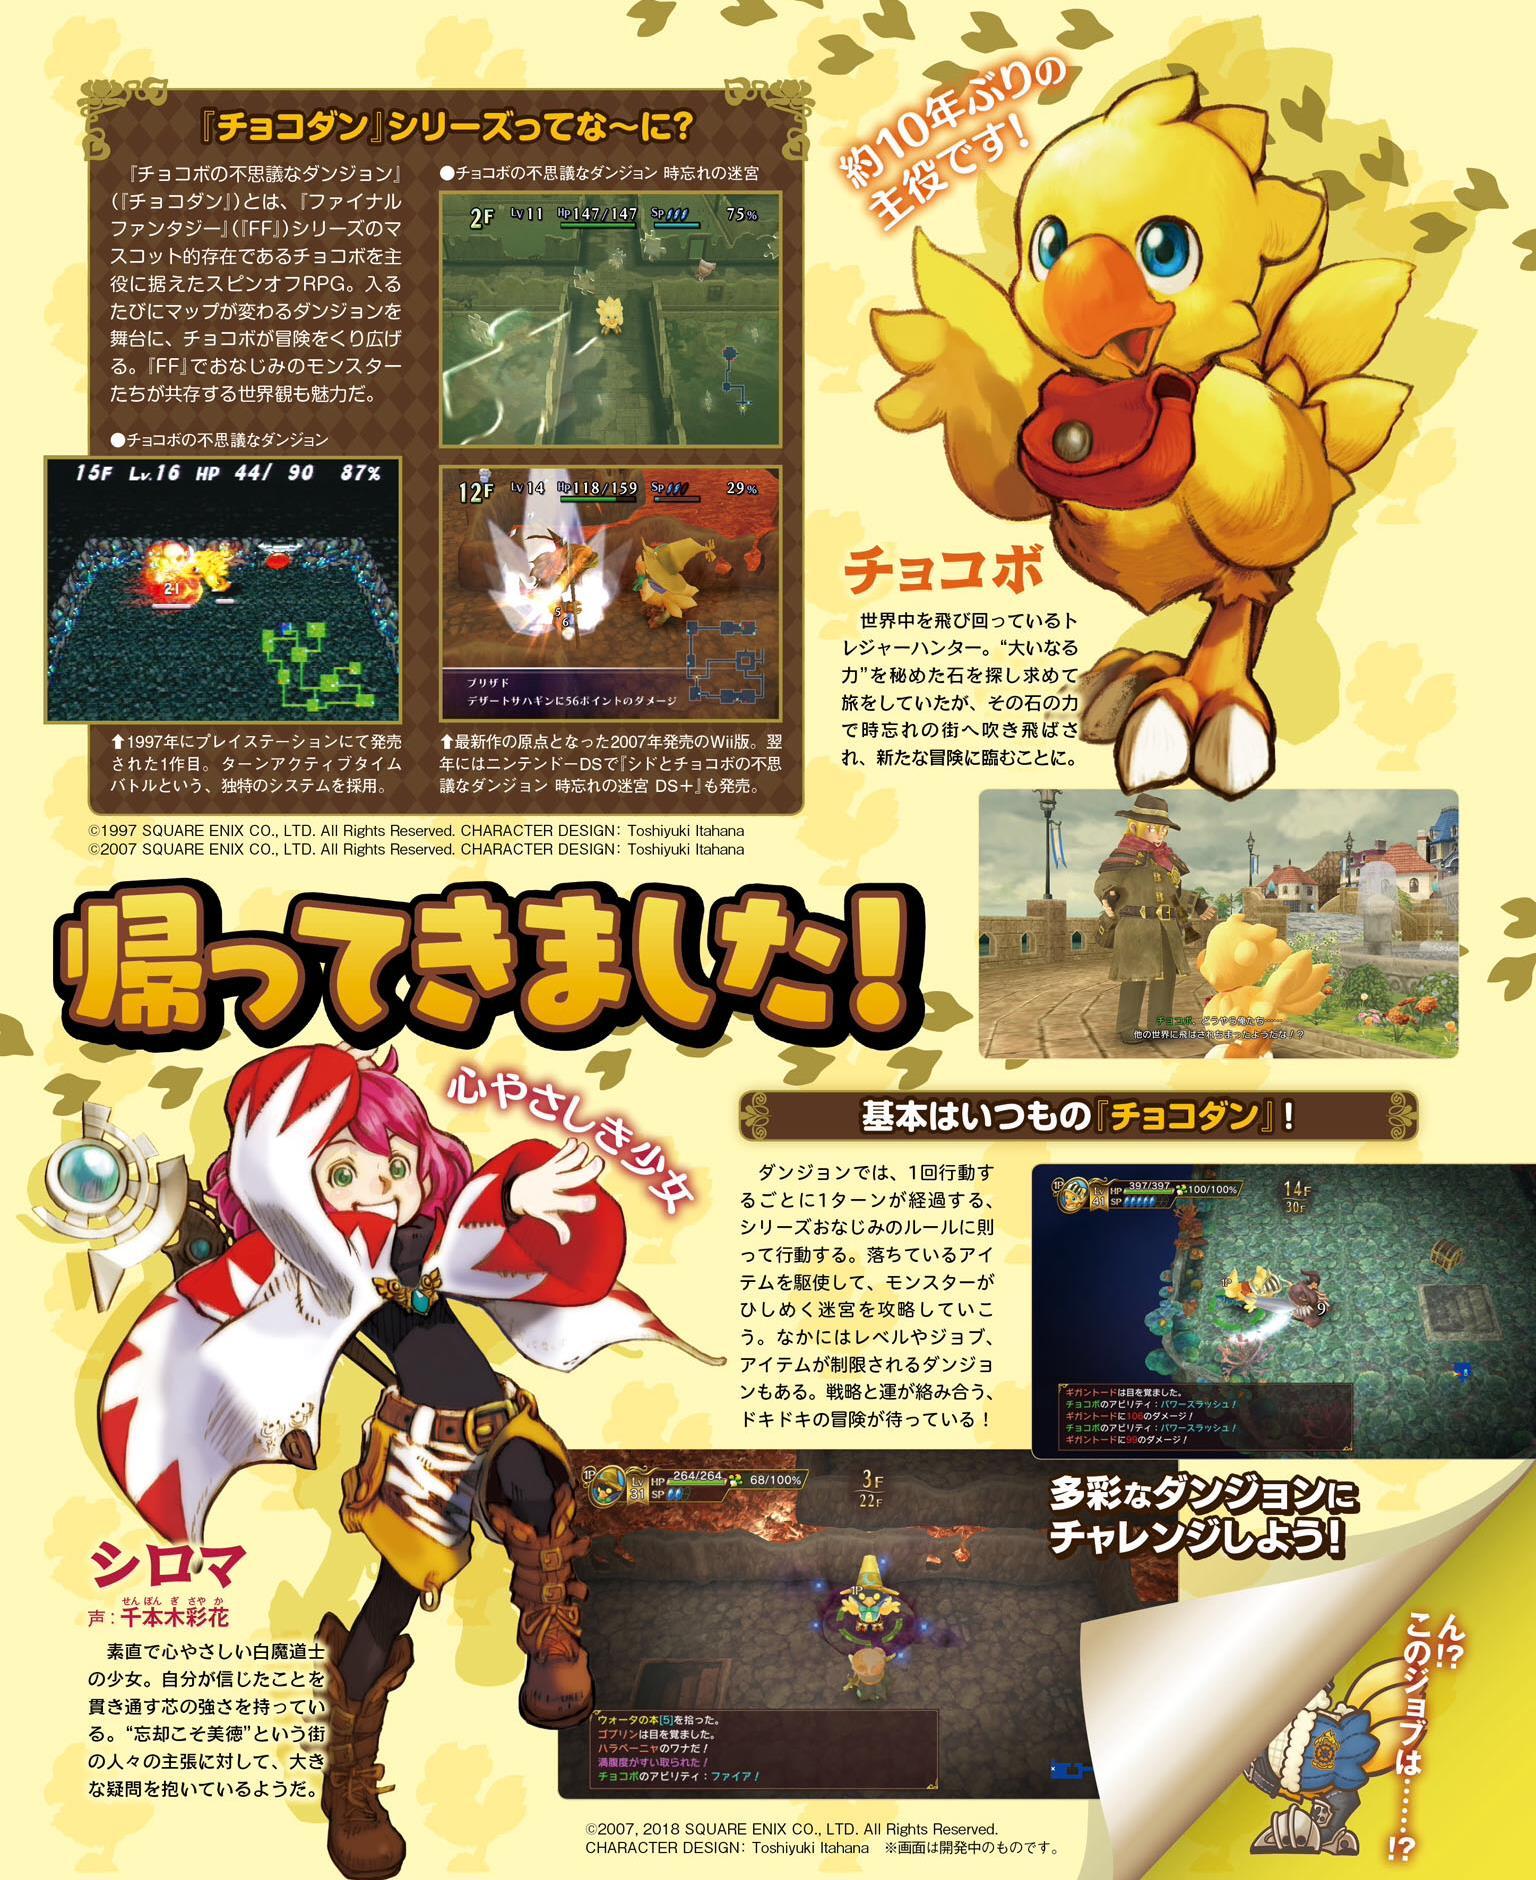 Scans roundup's Mystery Dungeon Every Buddy, Super Robot